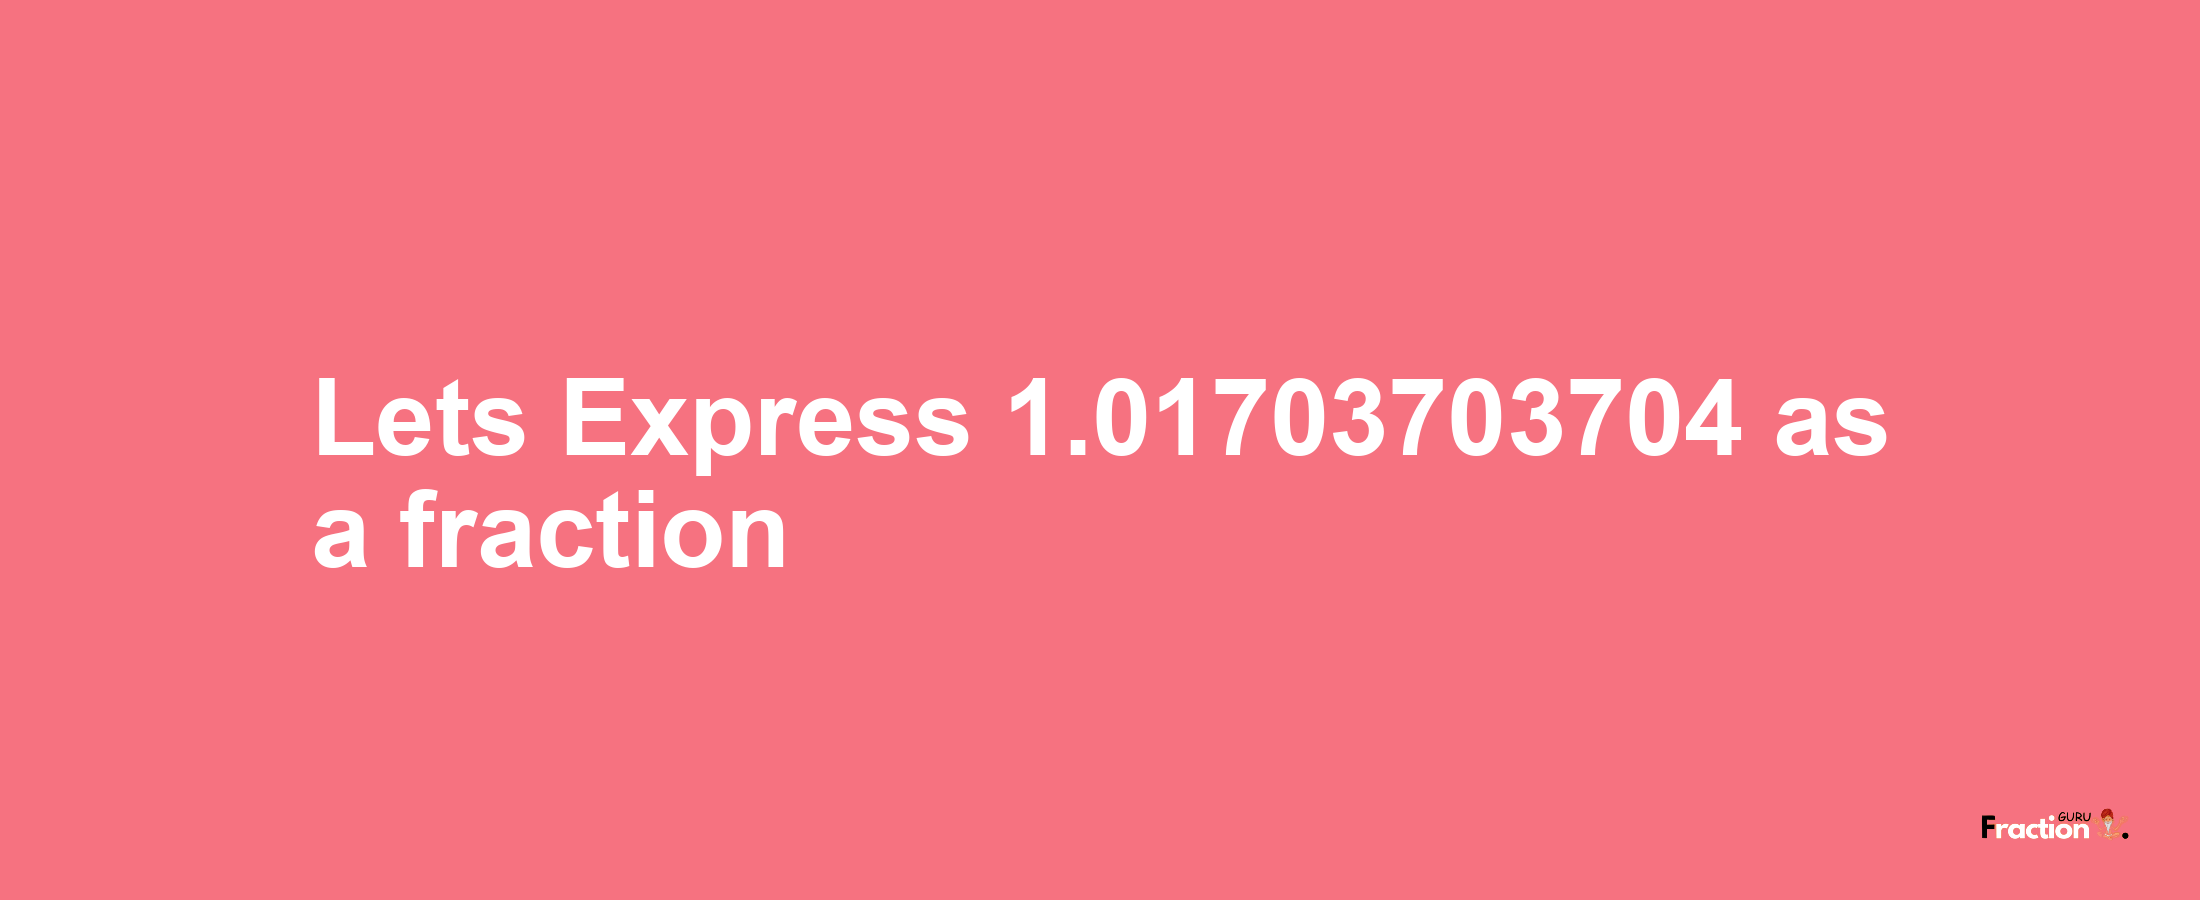 Lets Express 1.01703703704 as afraction